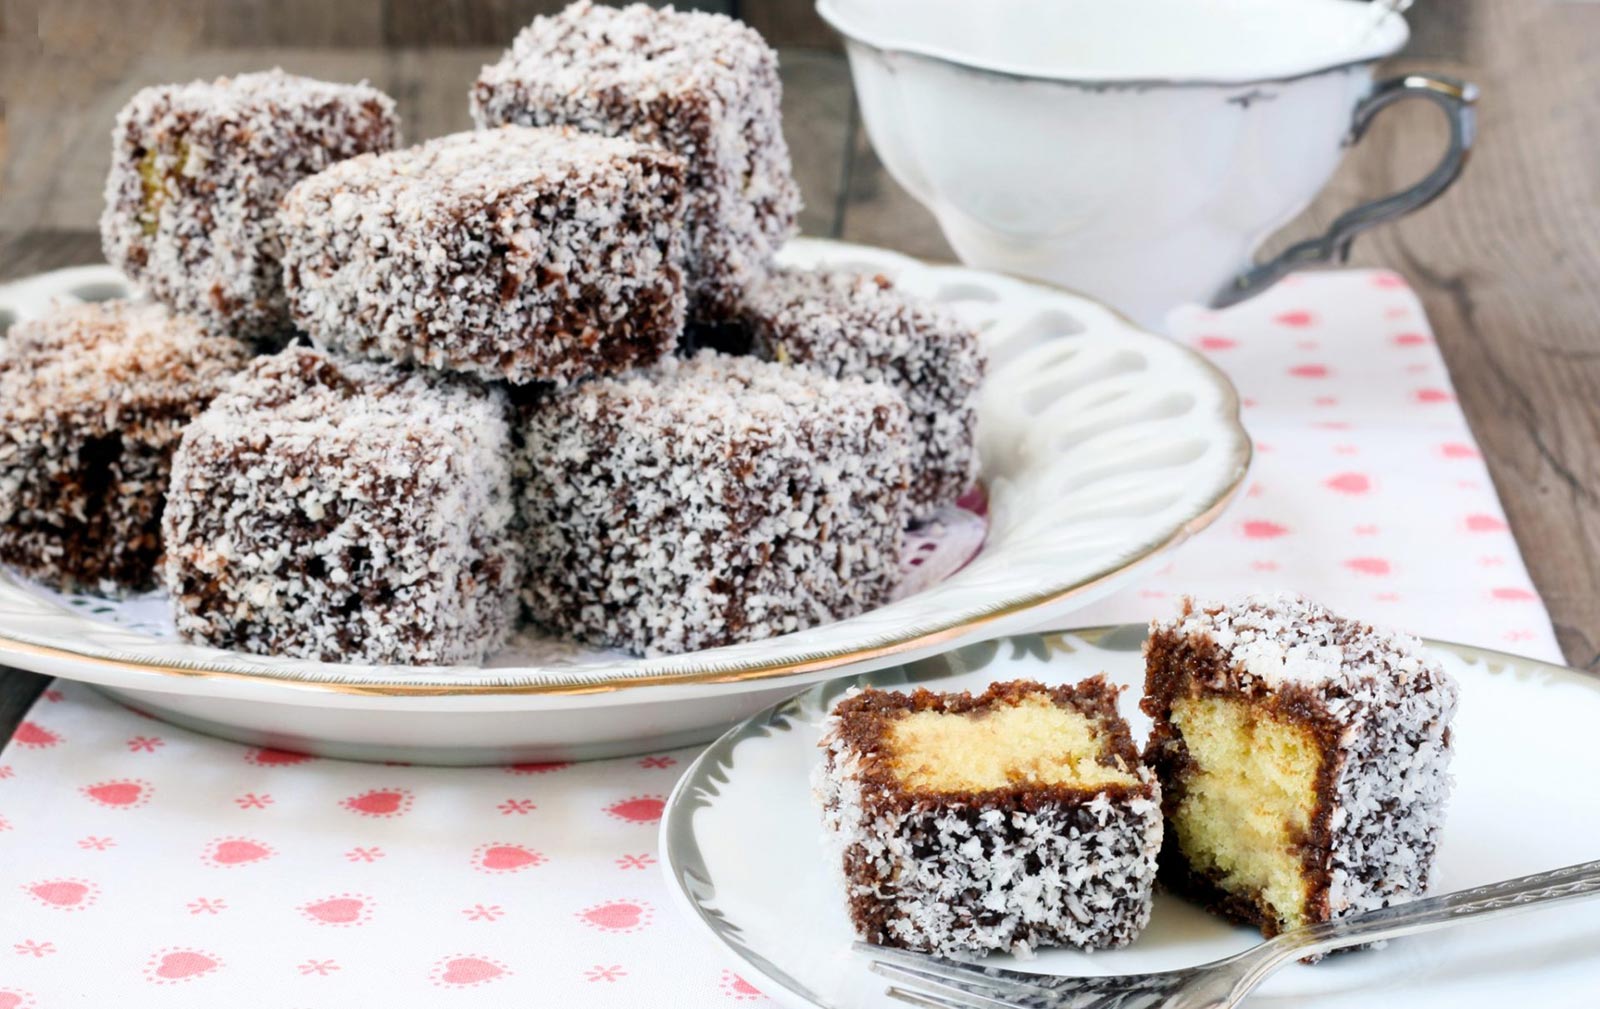 🌮 Most People Can’t Match 16/24 of These Foods to Their Country on a Map – Can You? Lamingtons